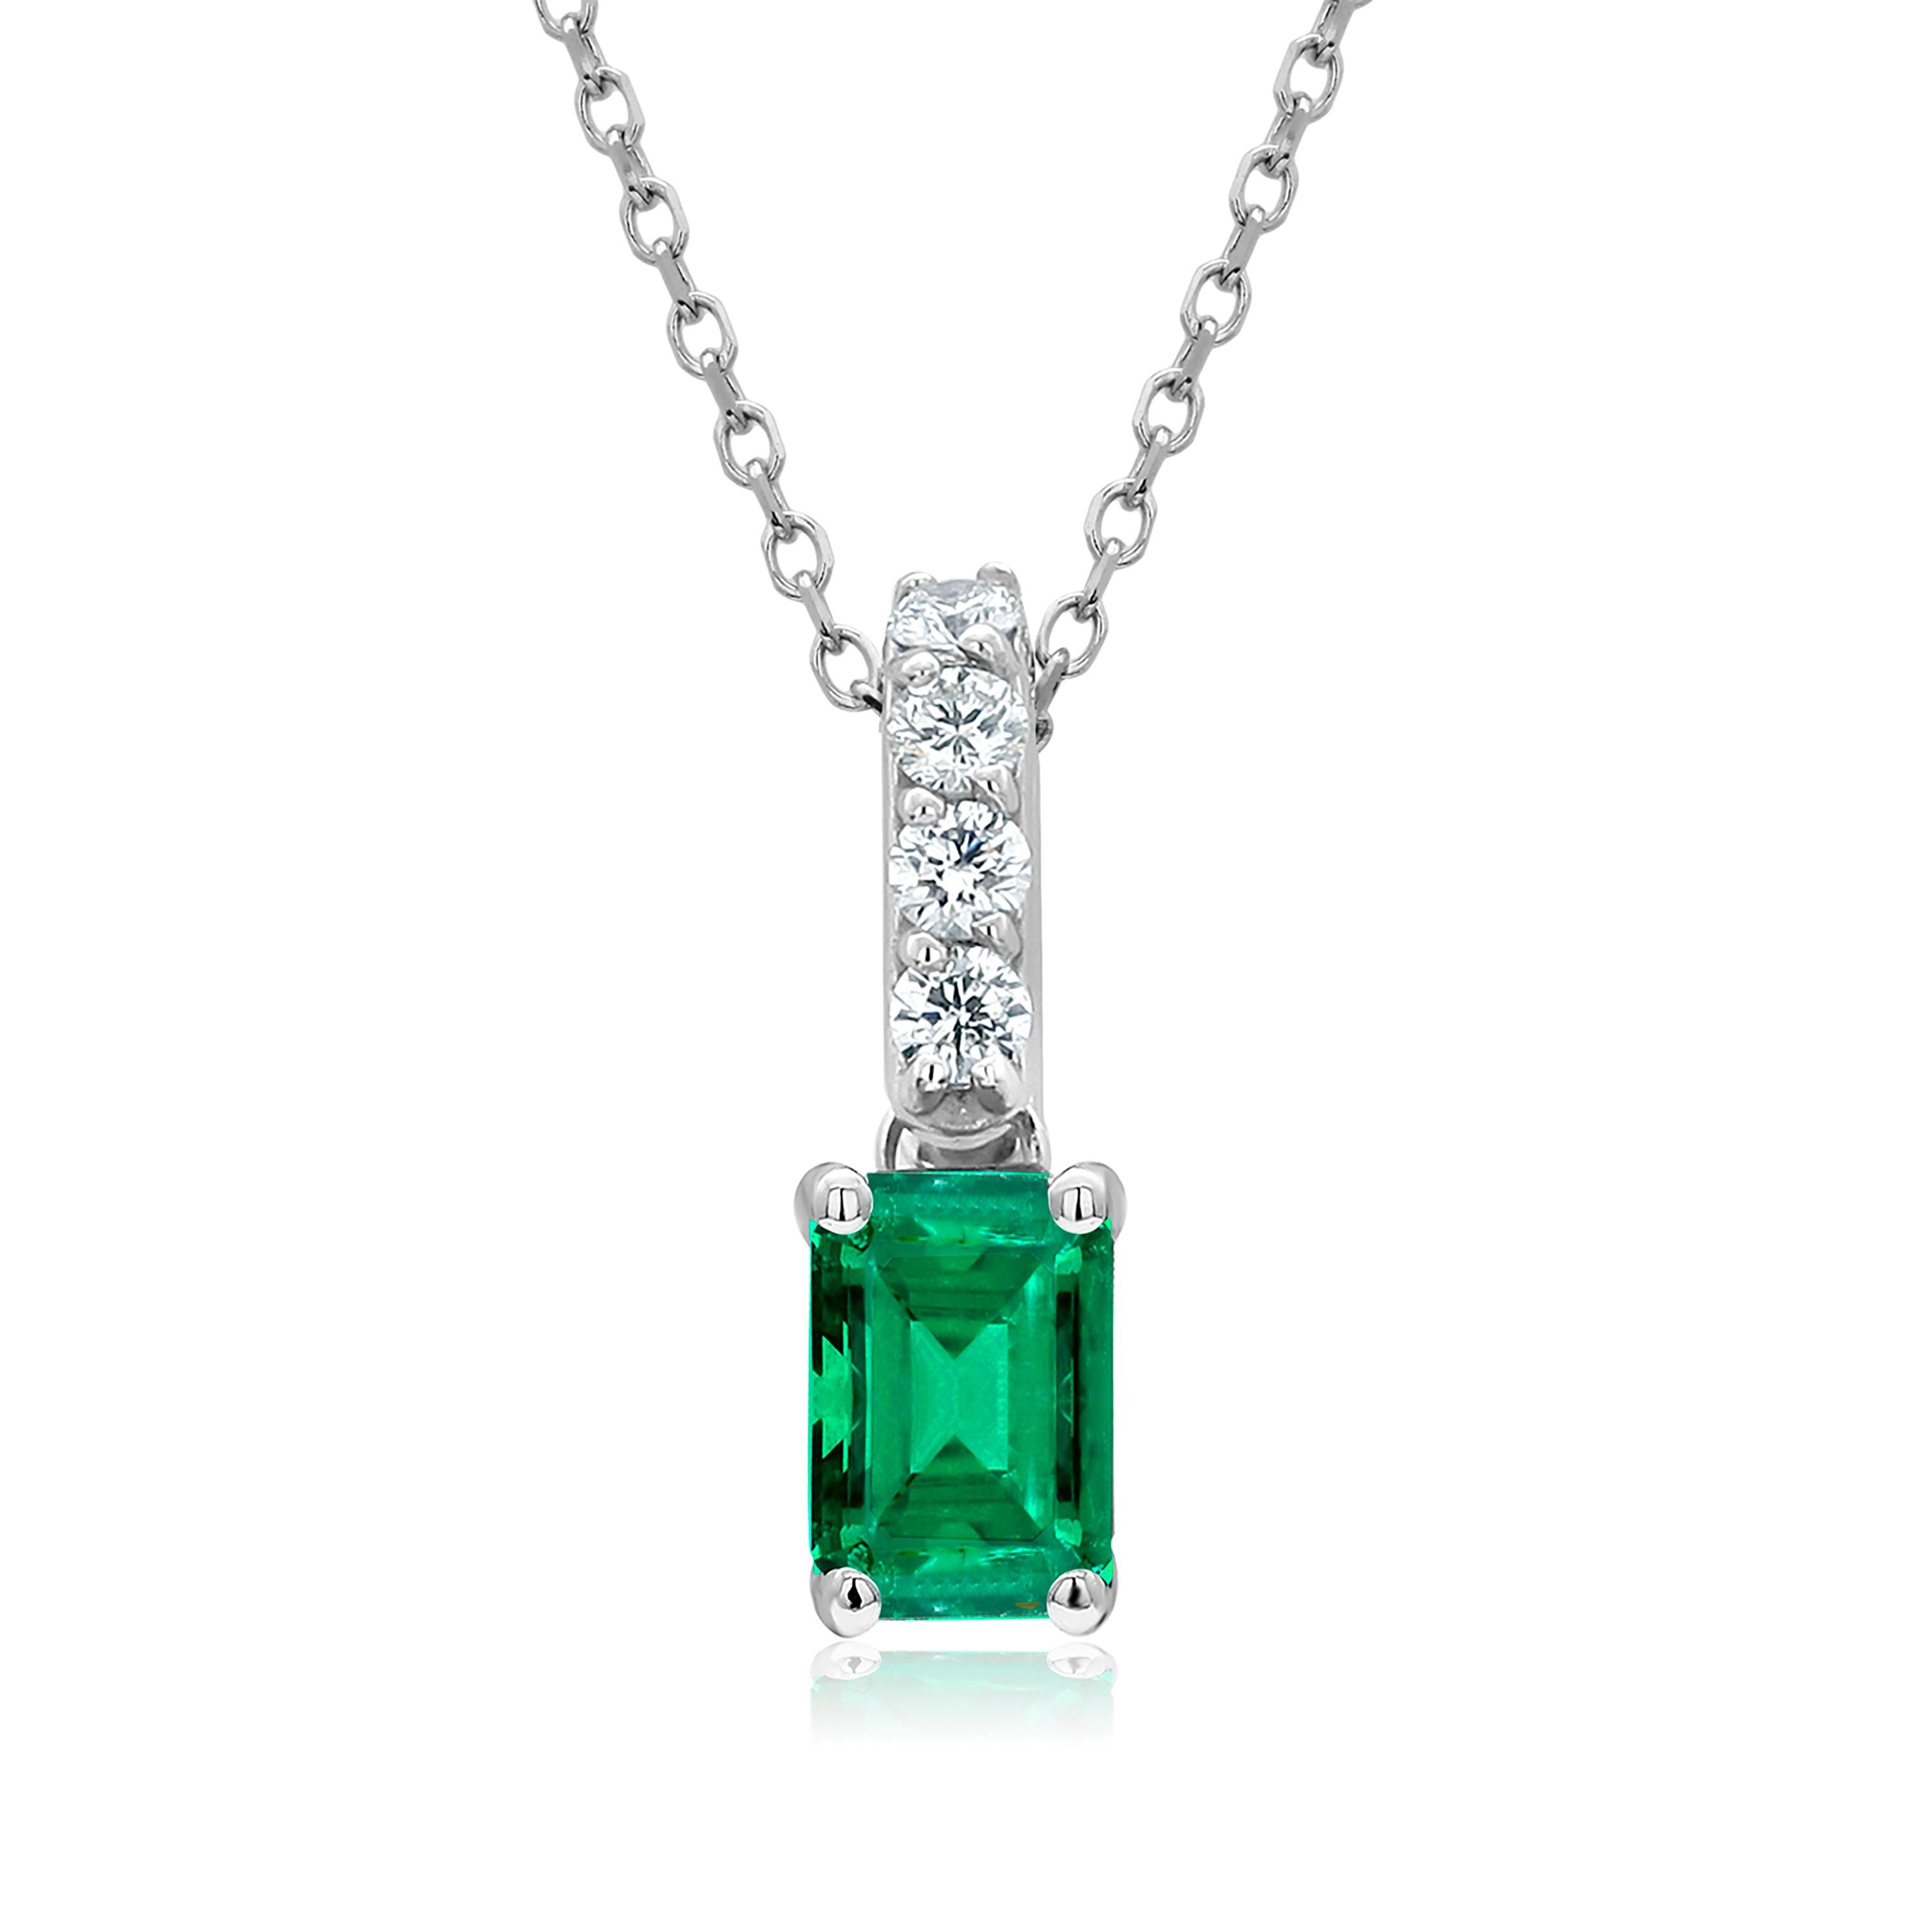 White Gold Drop Pendant Necklace with Emerald and a Diamond Bail  2